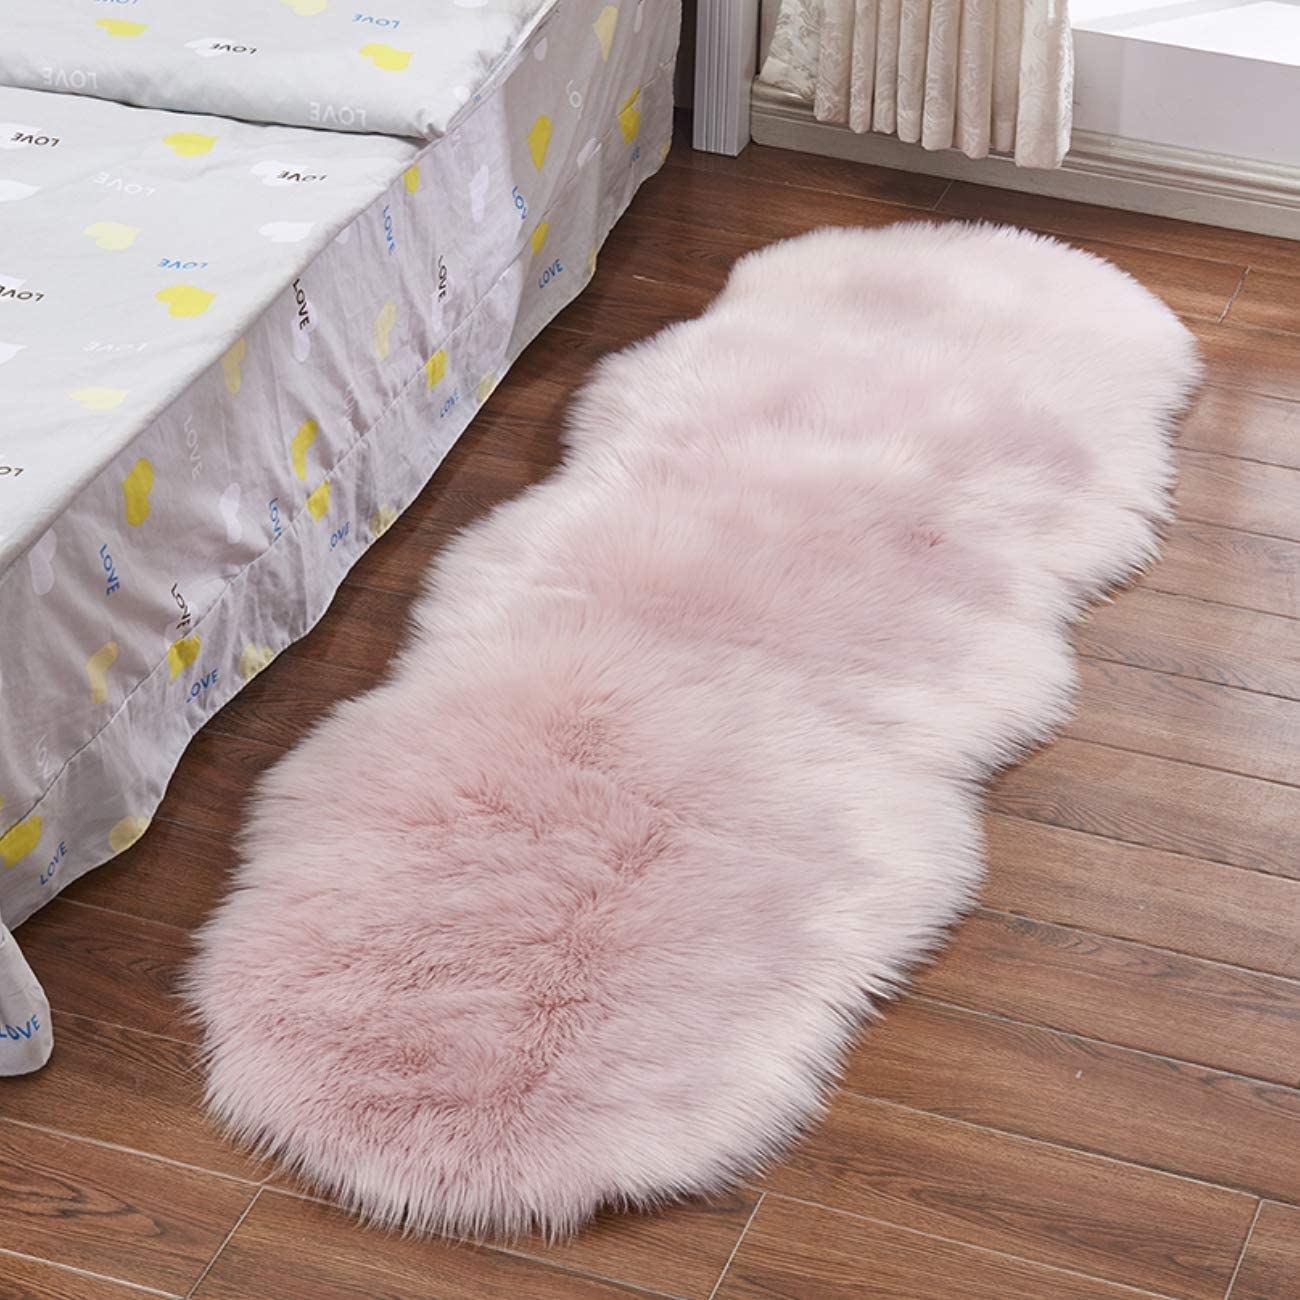 a shaggy faux fur rug next to a bed